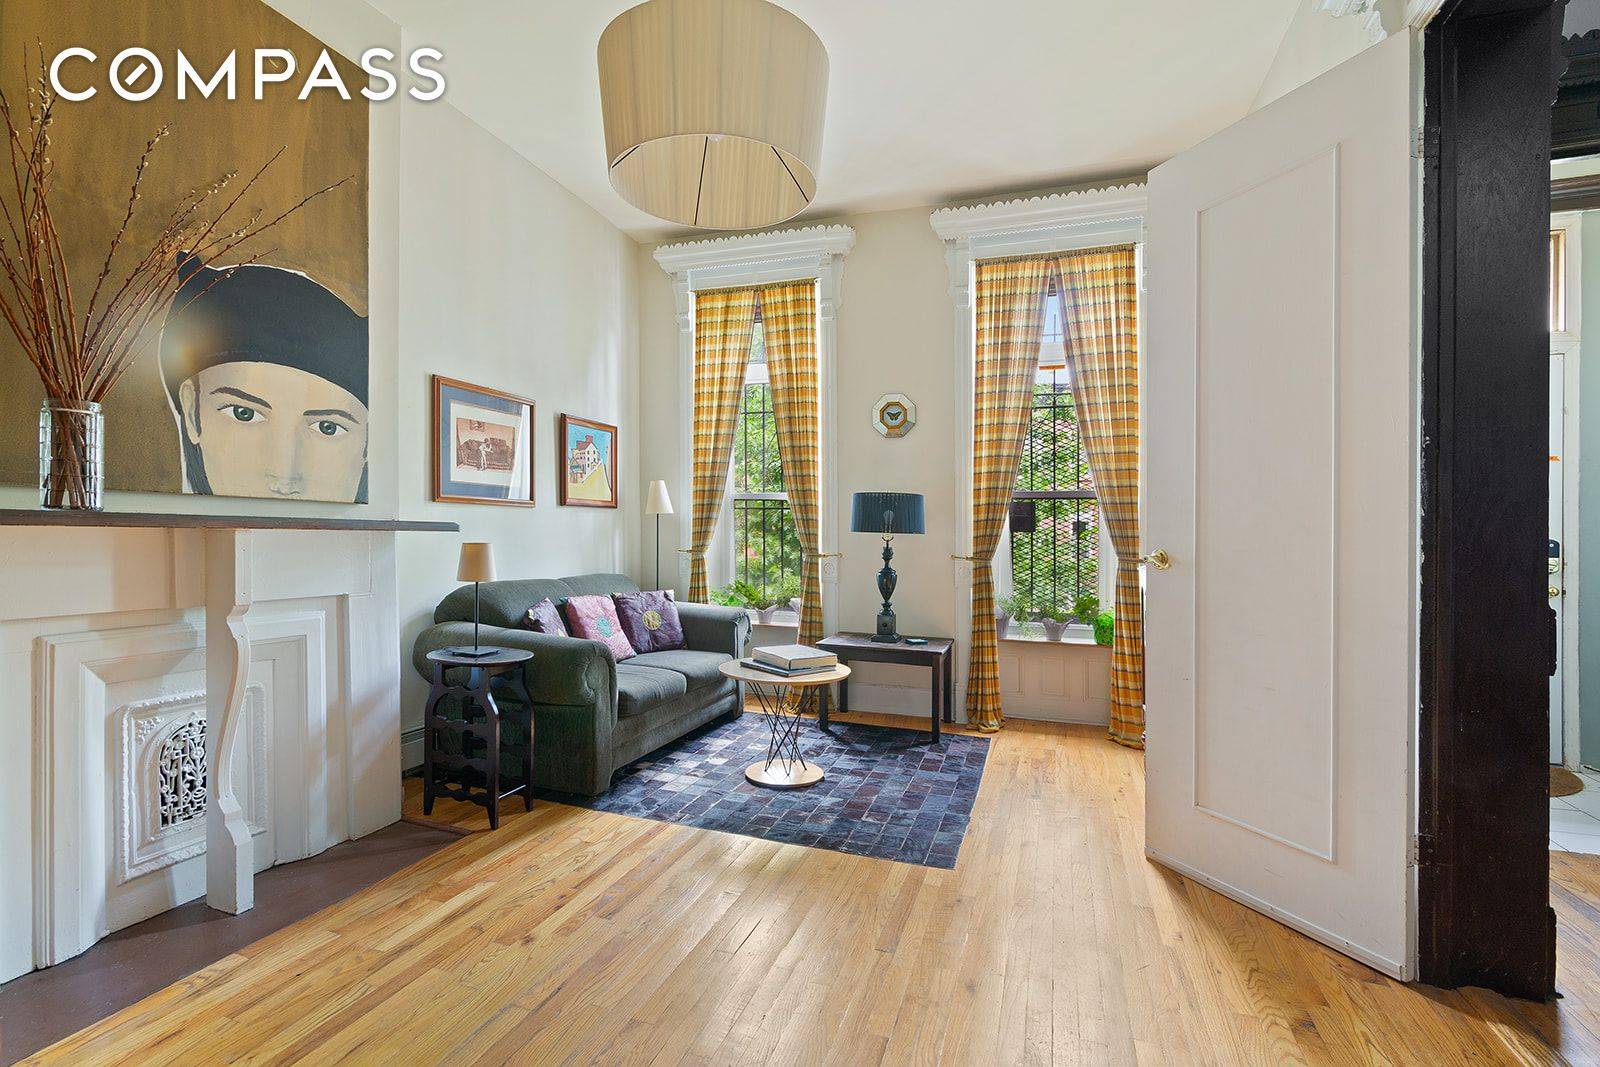 Welcome to 272 Van Buren Street a charming three story, two family brownstone tucked into a pretty, tree lined row in Bedford Stuyvesant North.